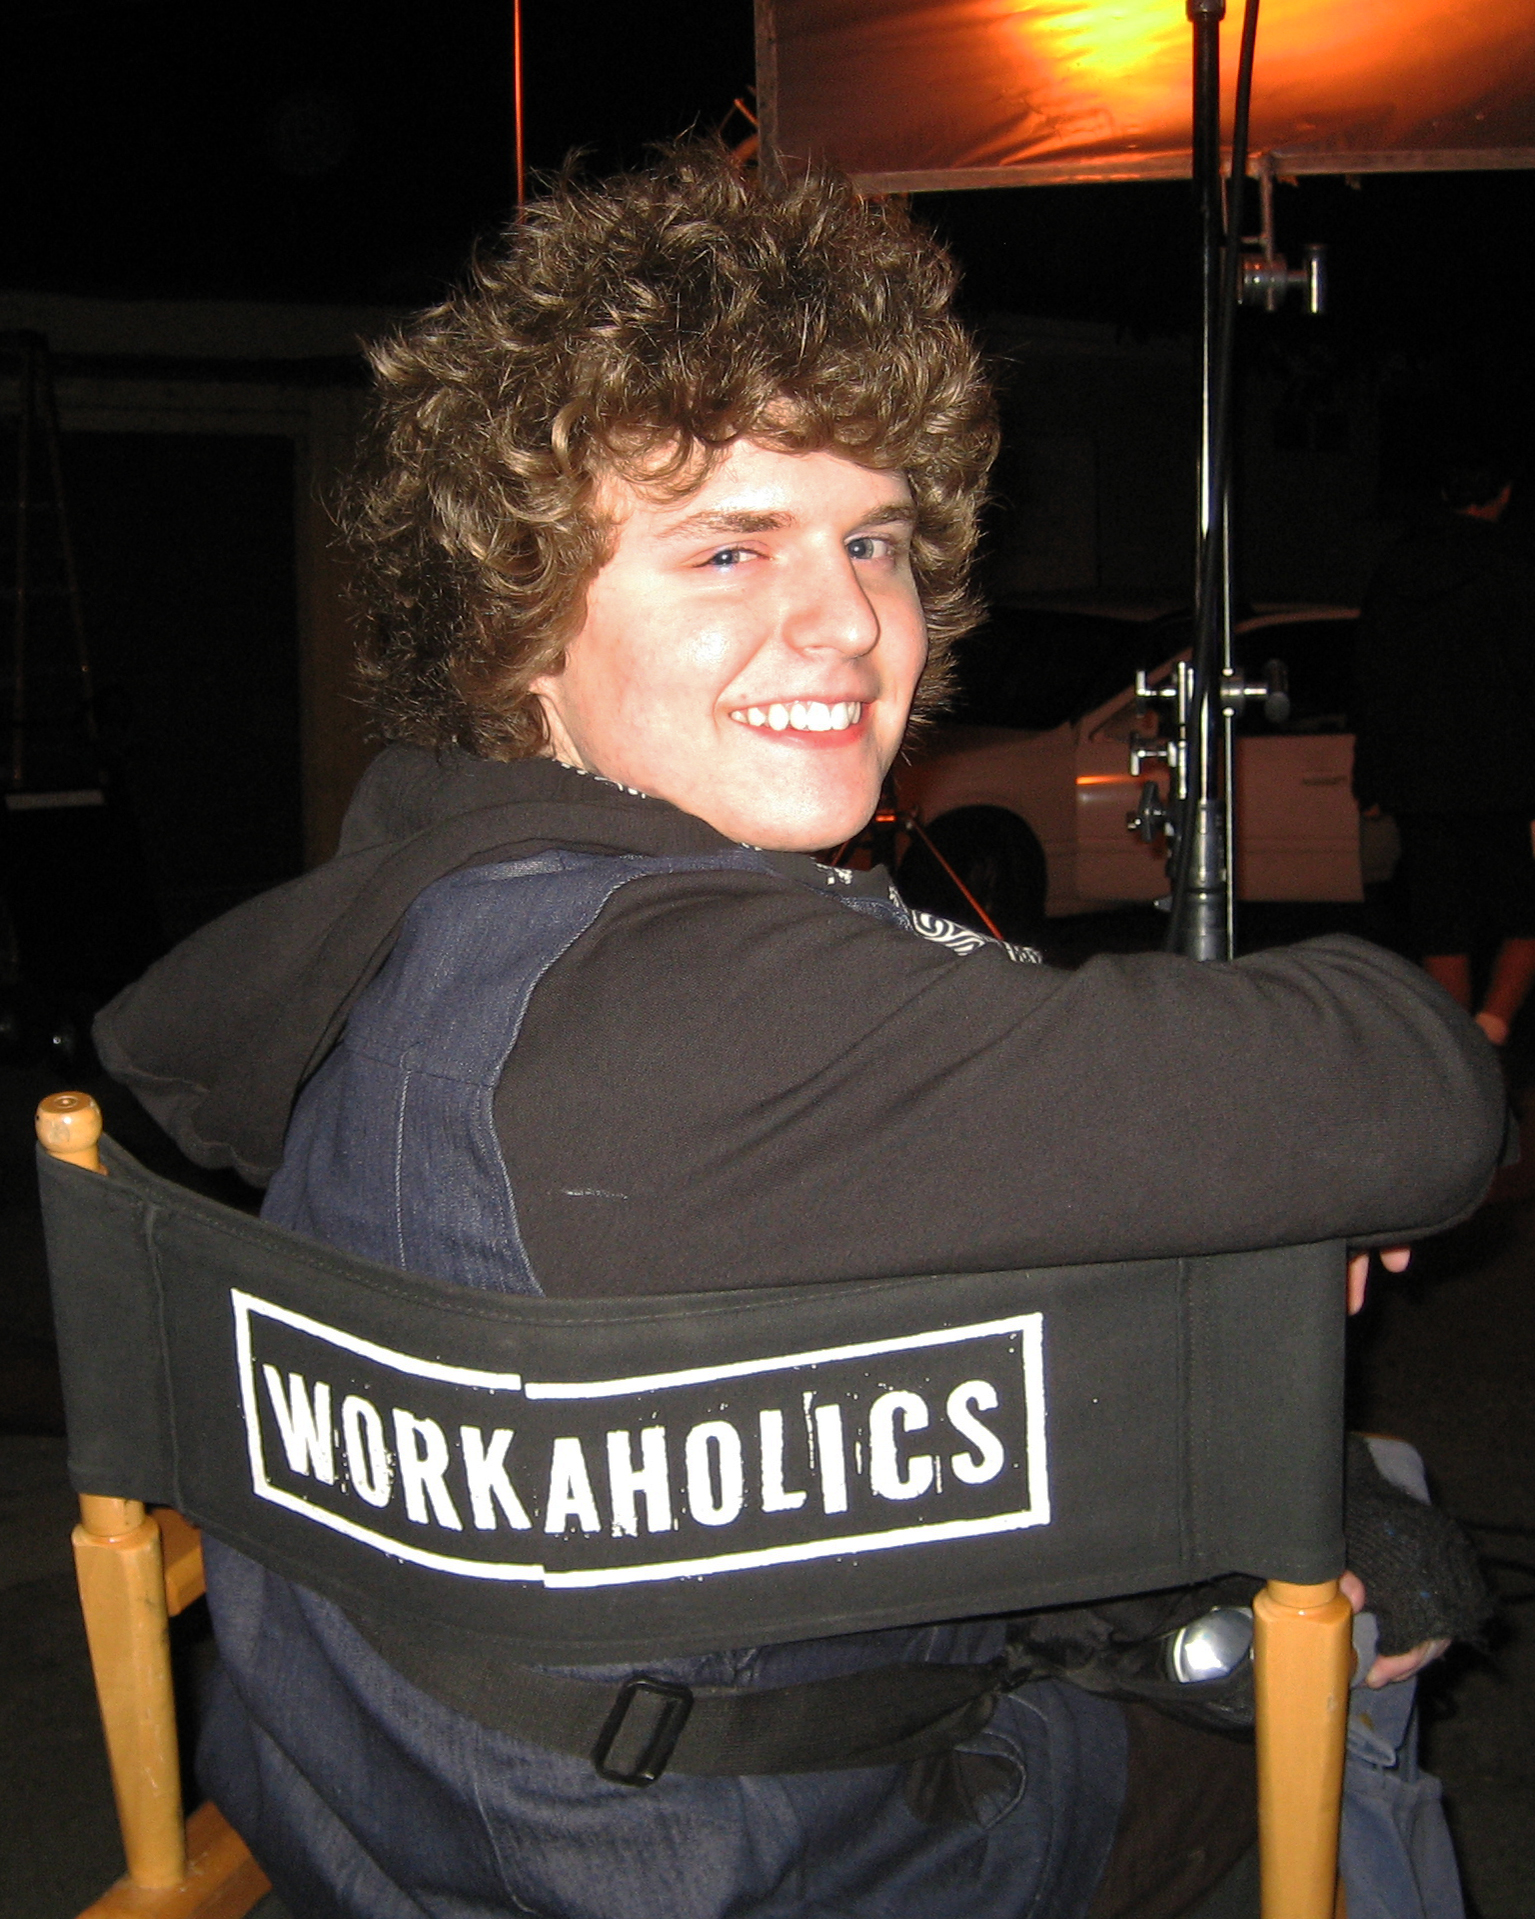 Maxwell Chase - Workaholics 11/9/12